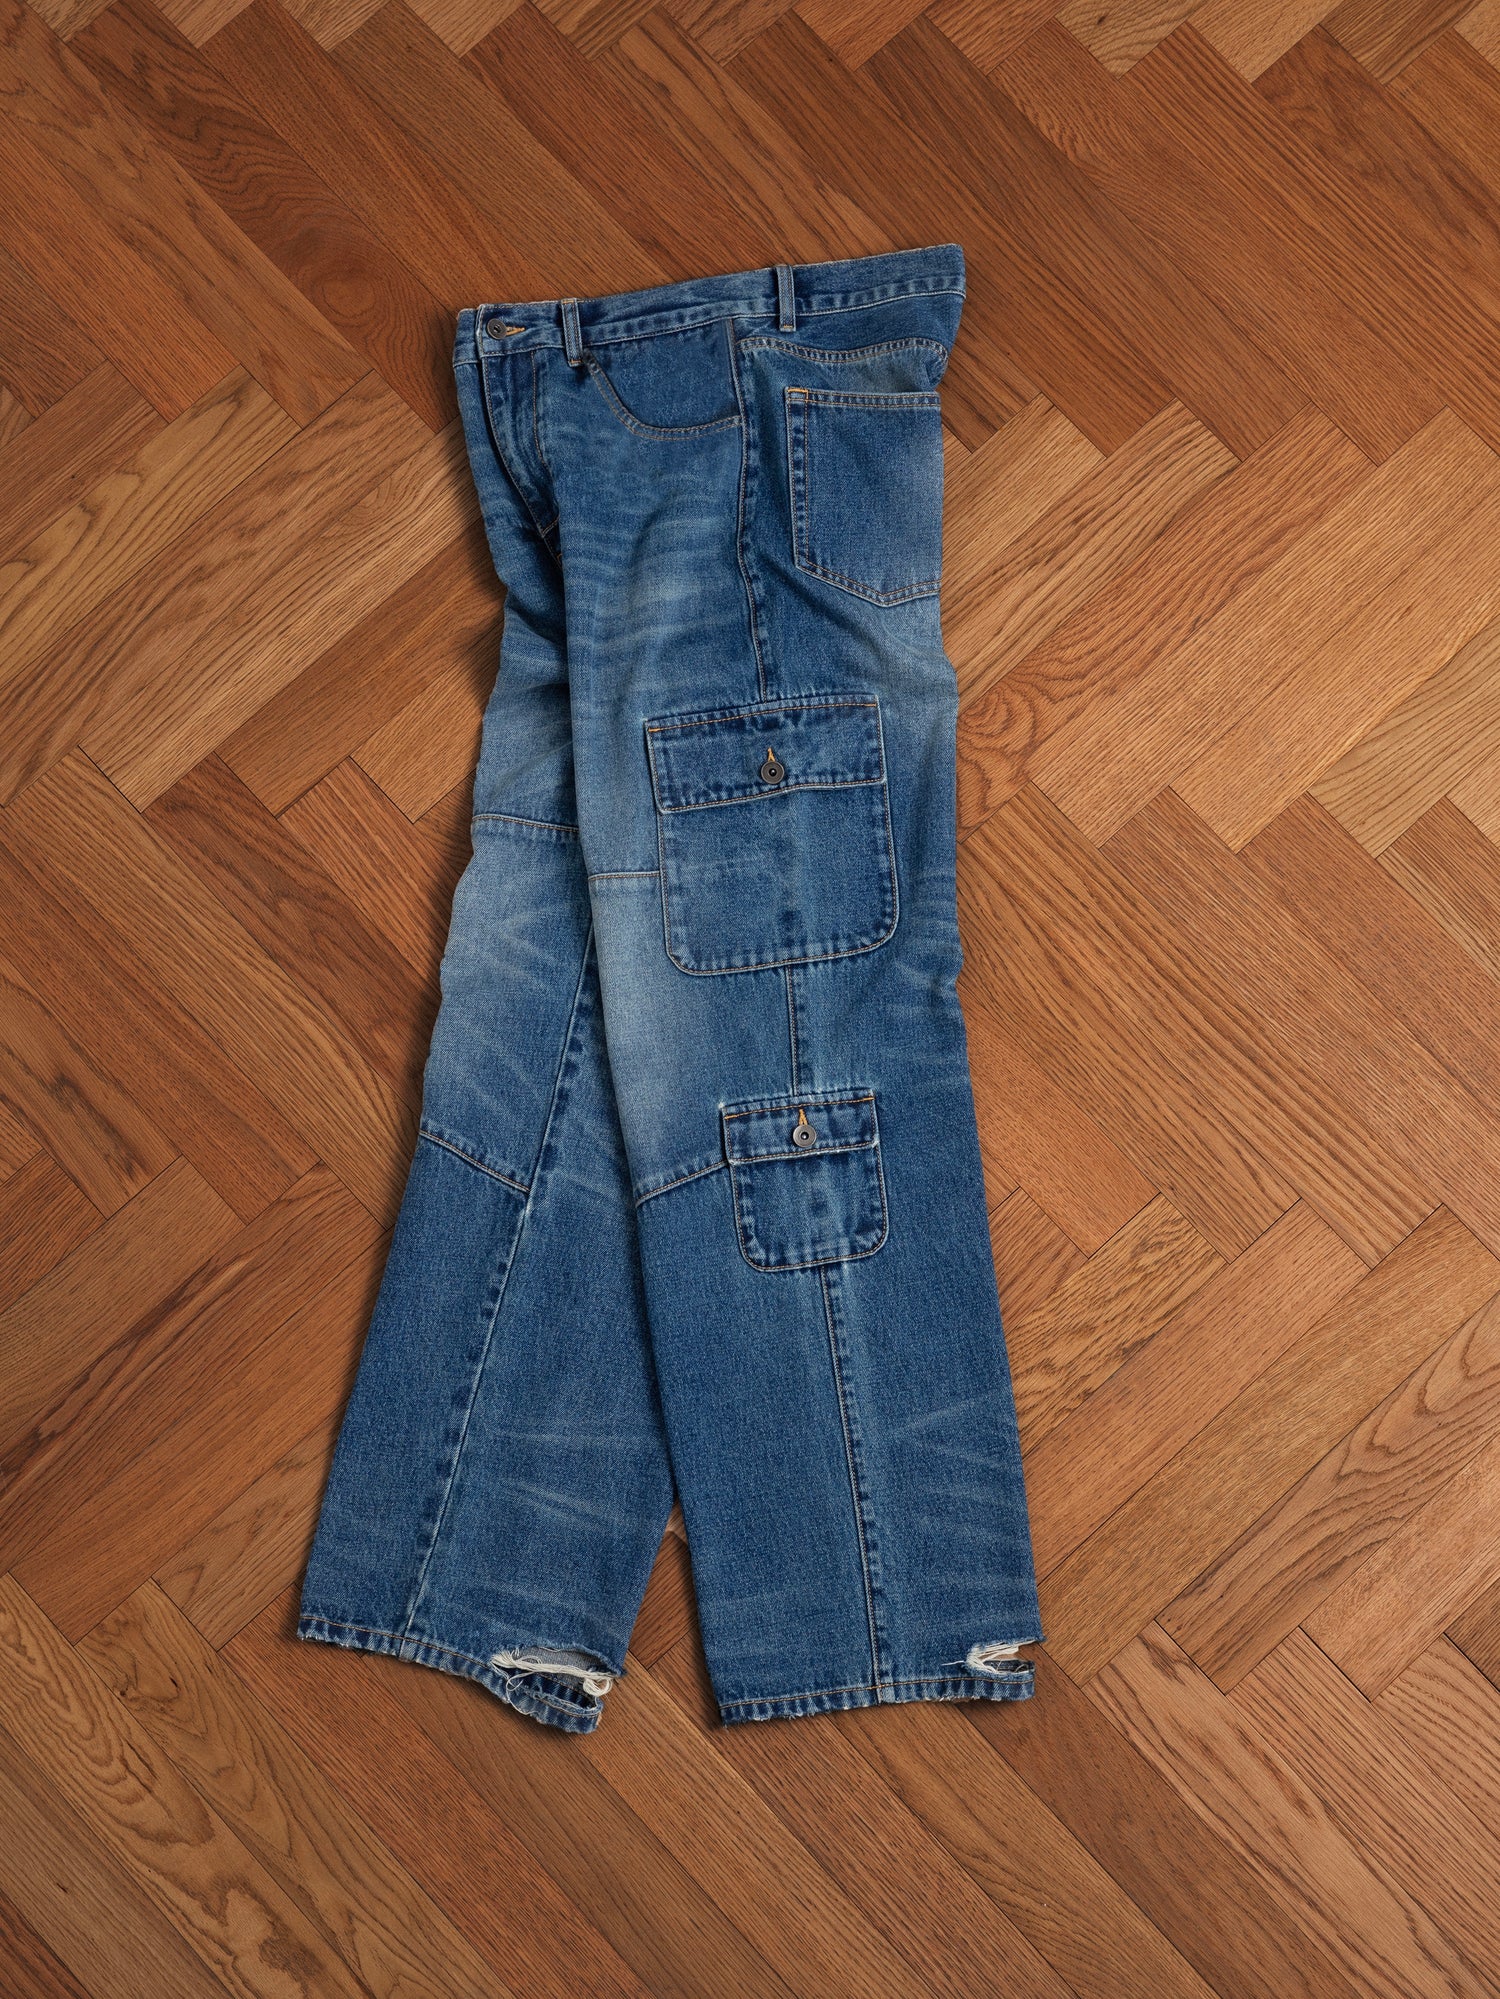 A pair of Found Siwa Cargo Paneled Jeans in blue lying flat on a herringbone patterned wooden floor.